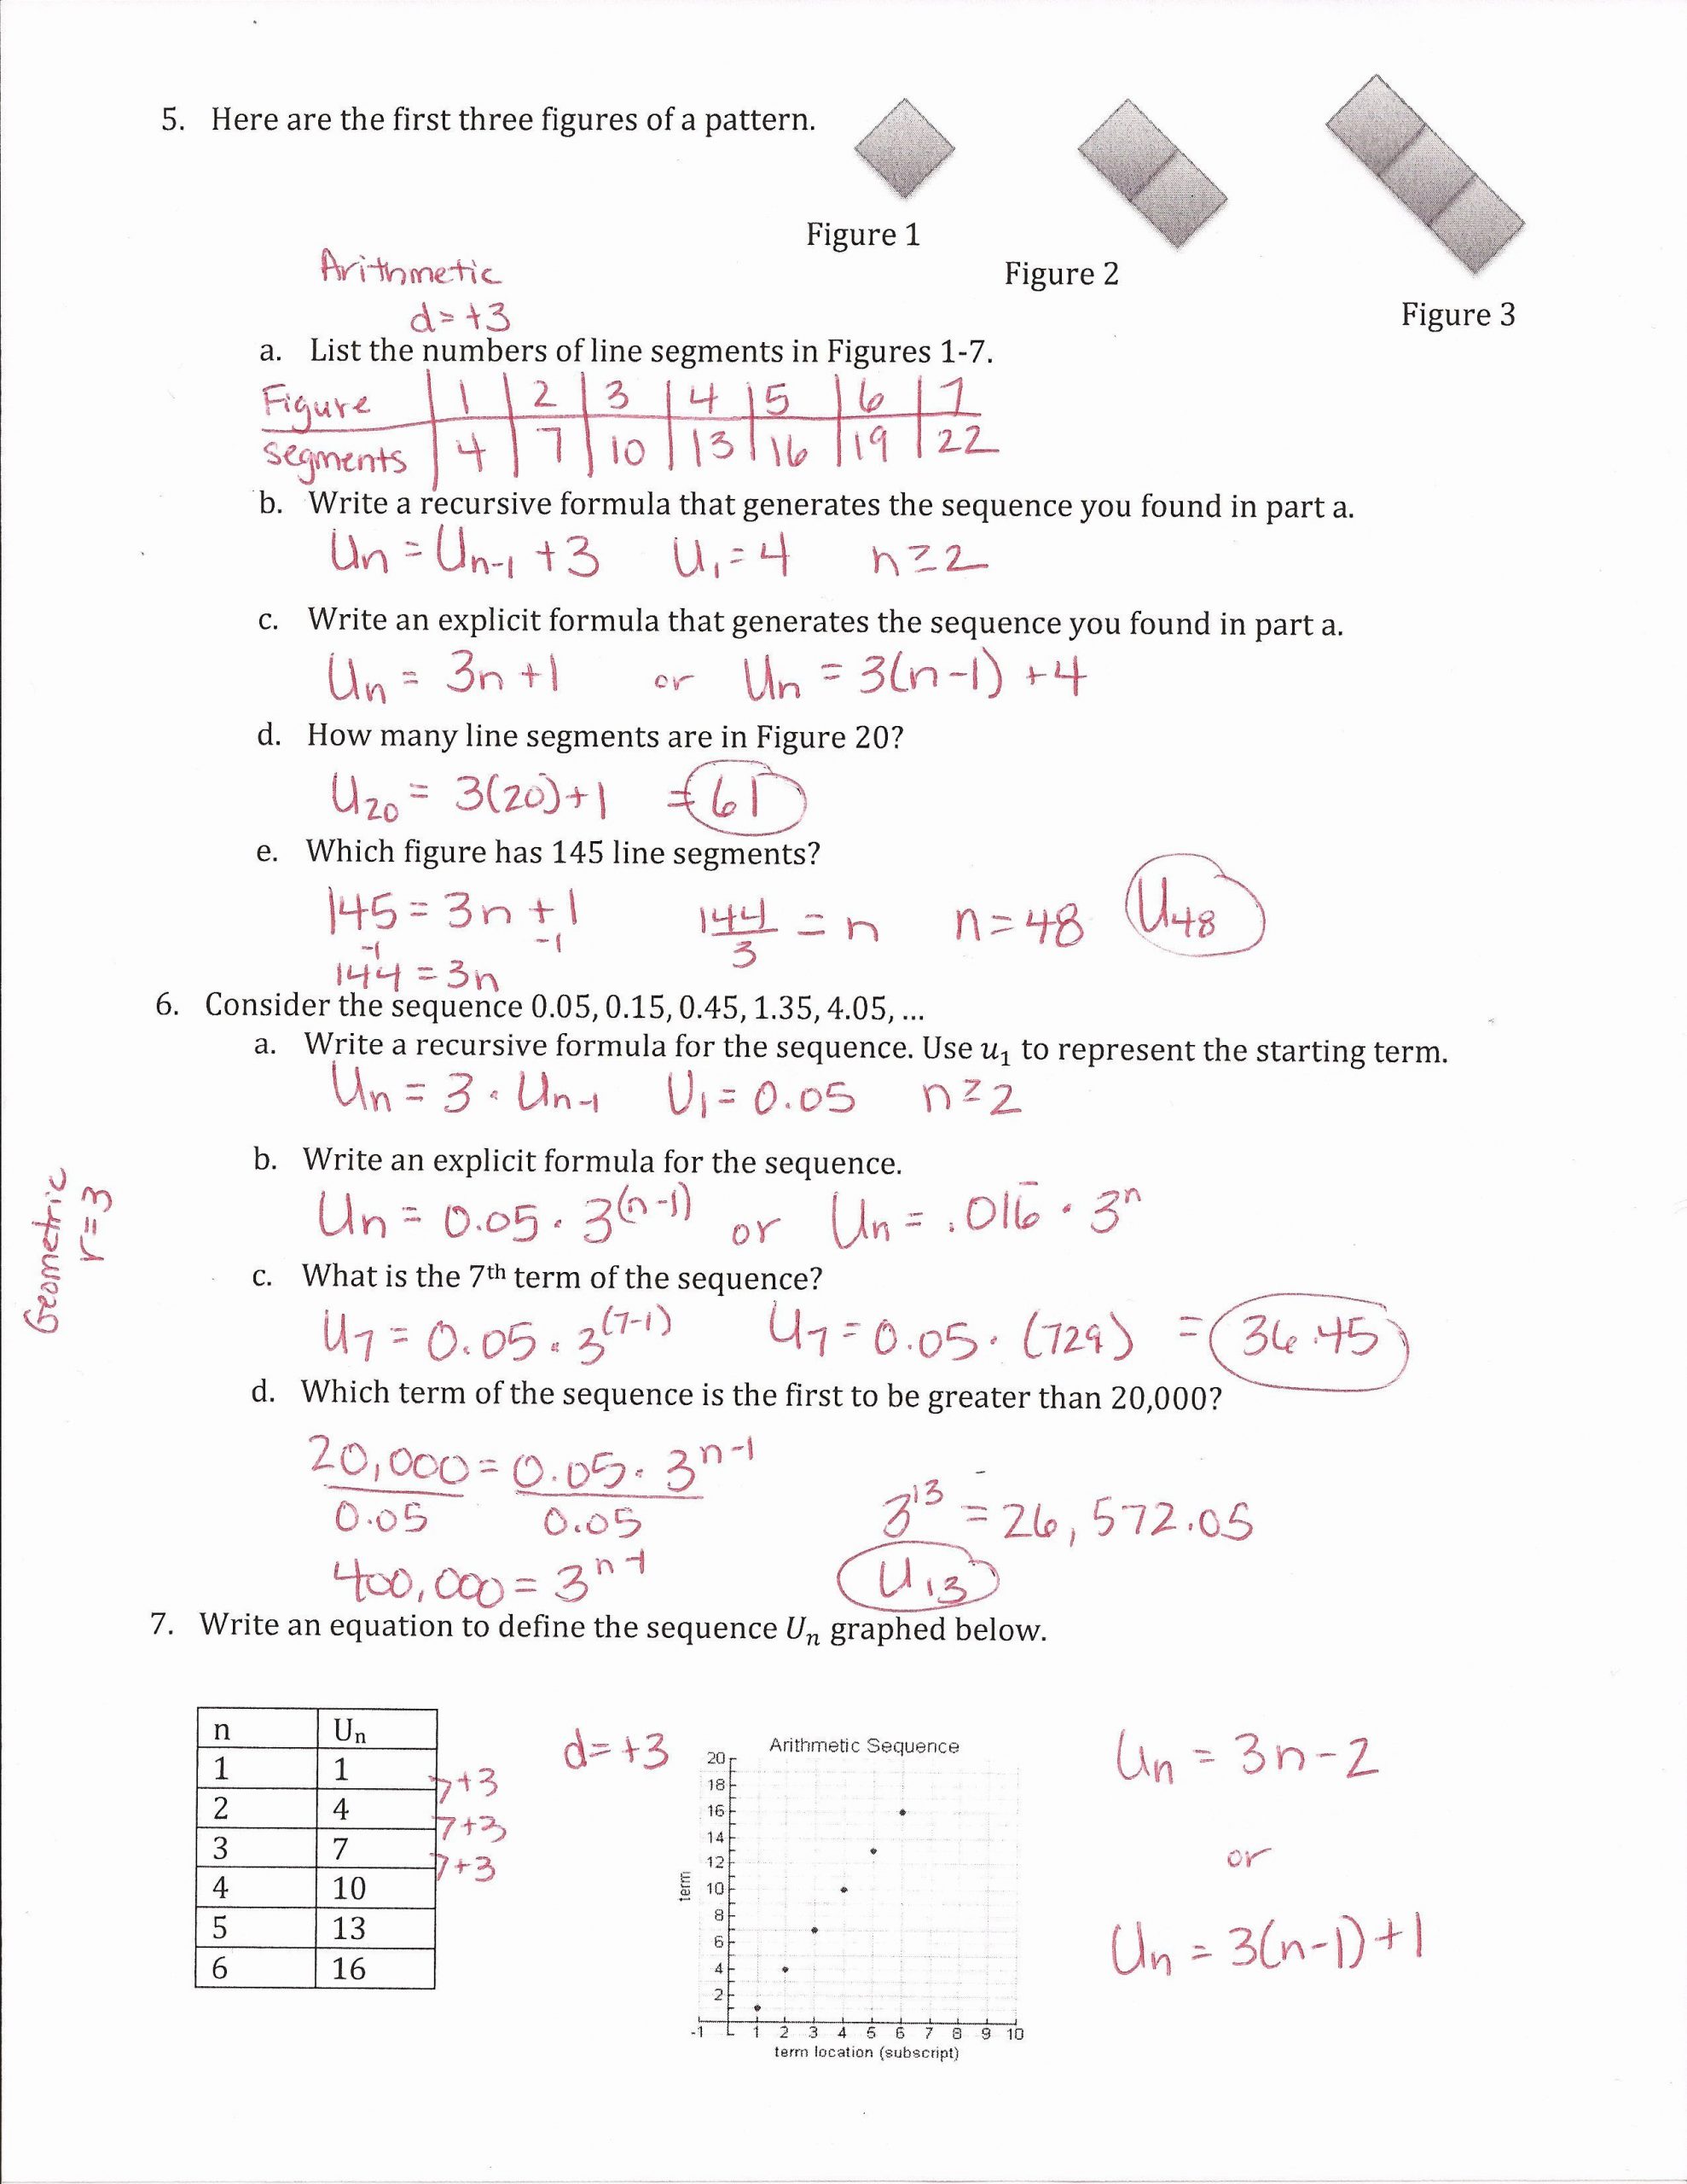 Geometric Sequence Worksheet Answers 50 Arithmetic Sequence Worksheet Answers In 2020